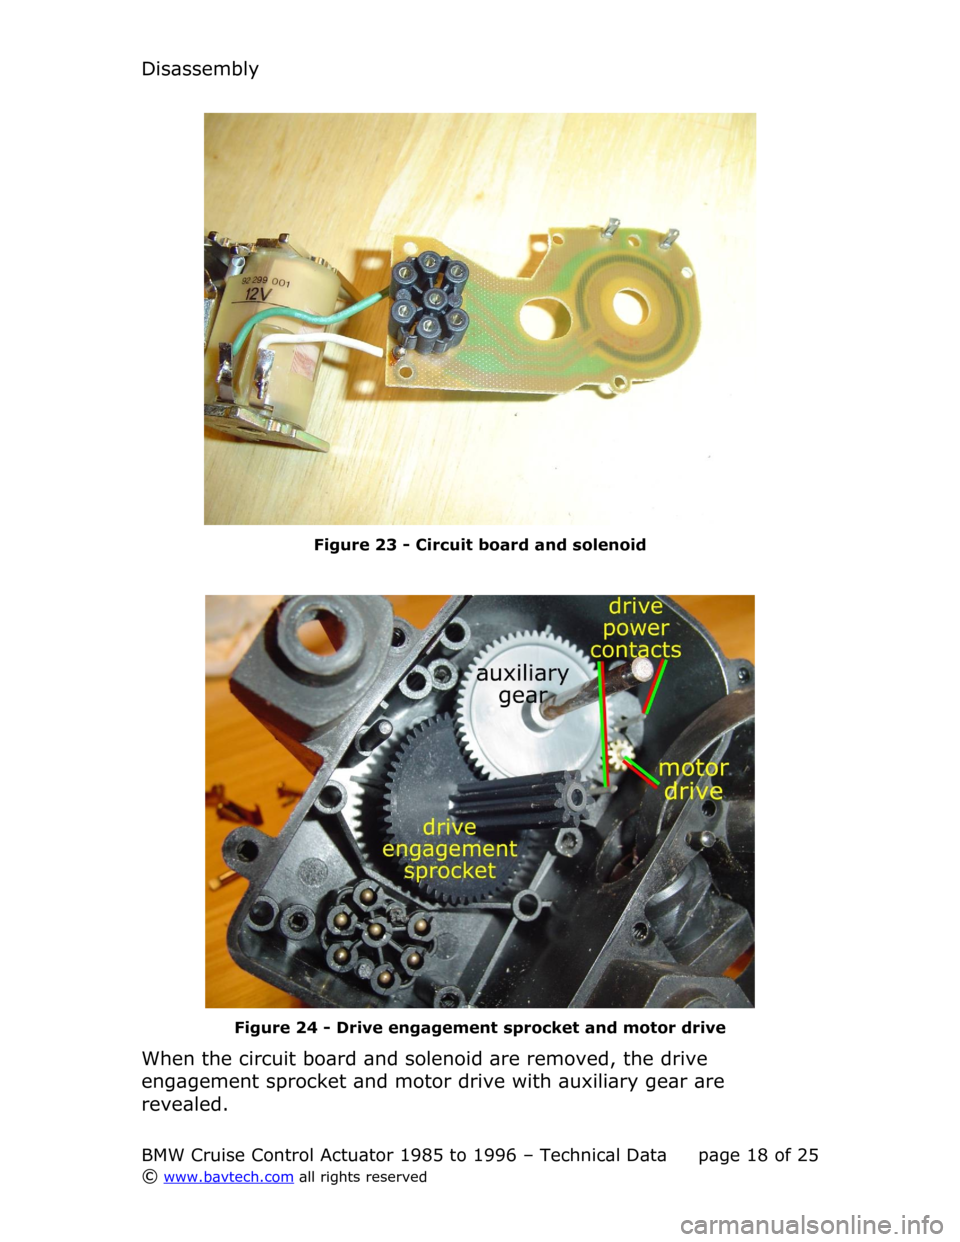 BMW 3 SERIES 1989 E36 Cruise Control Acutator Technical Data User Guide Disassembly
Figure  23  - Circuit board and solenoid
Figure  24  - Drive engagement sprocket and motor drive
When the circuit board and solenoid are removed, the drive  
engagement sprocket and motor 